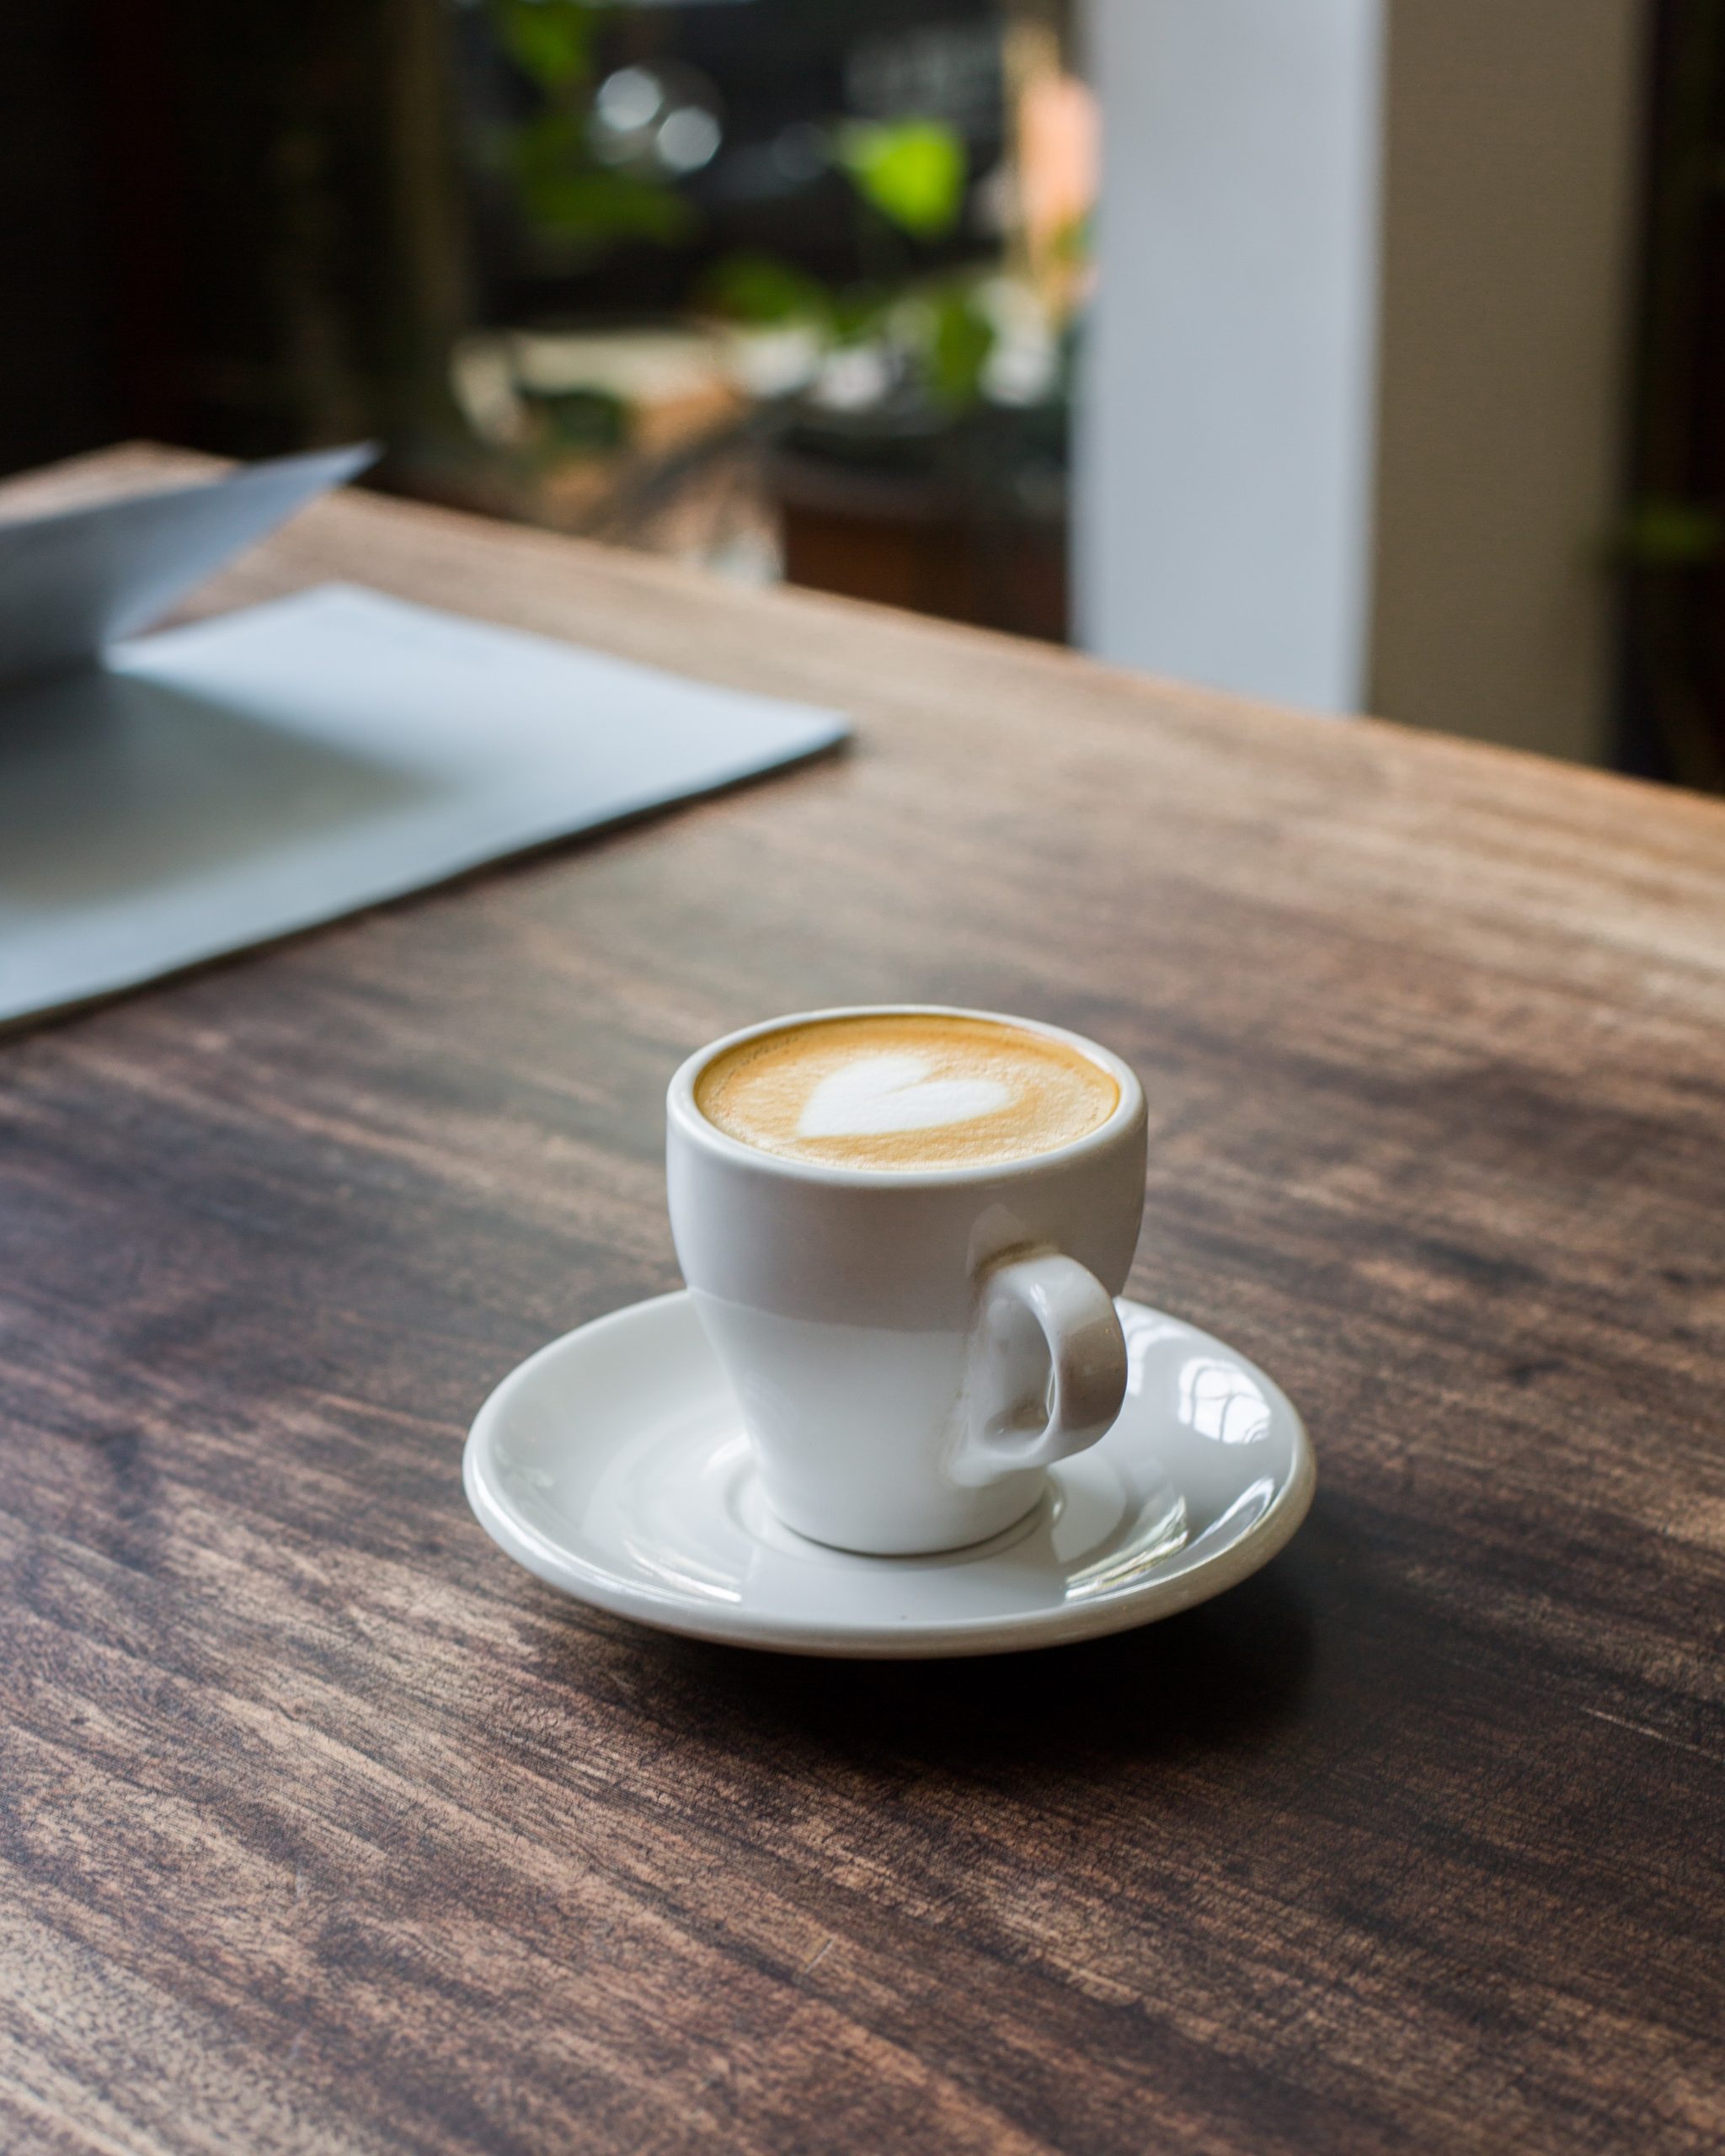 A latte in a white cup sitting on a wooden table.